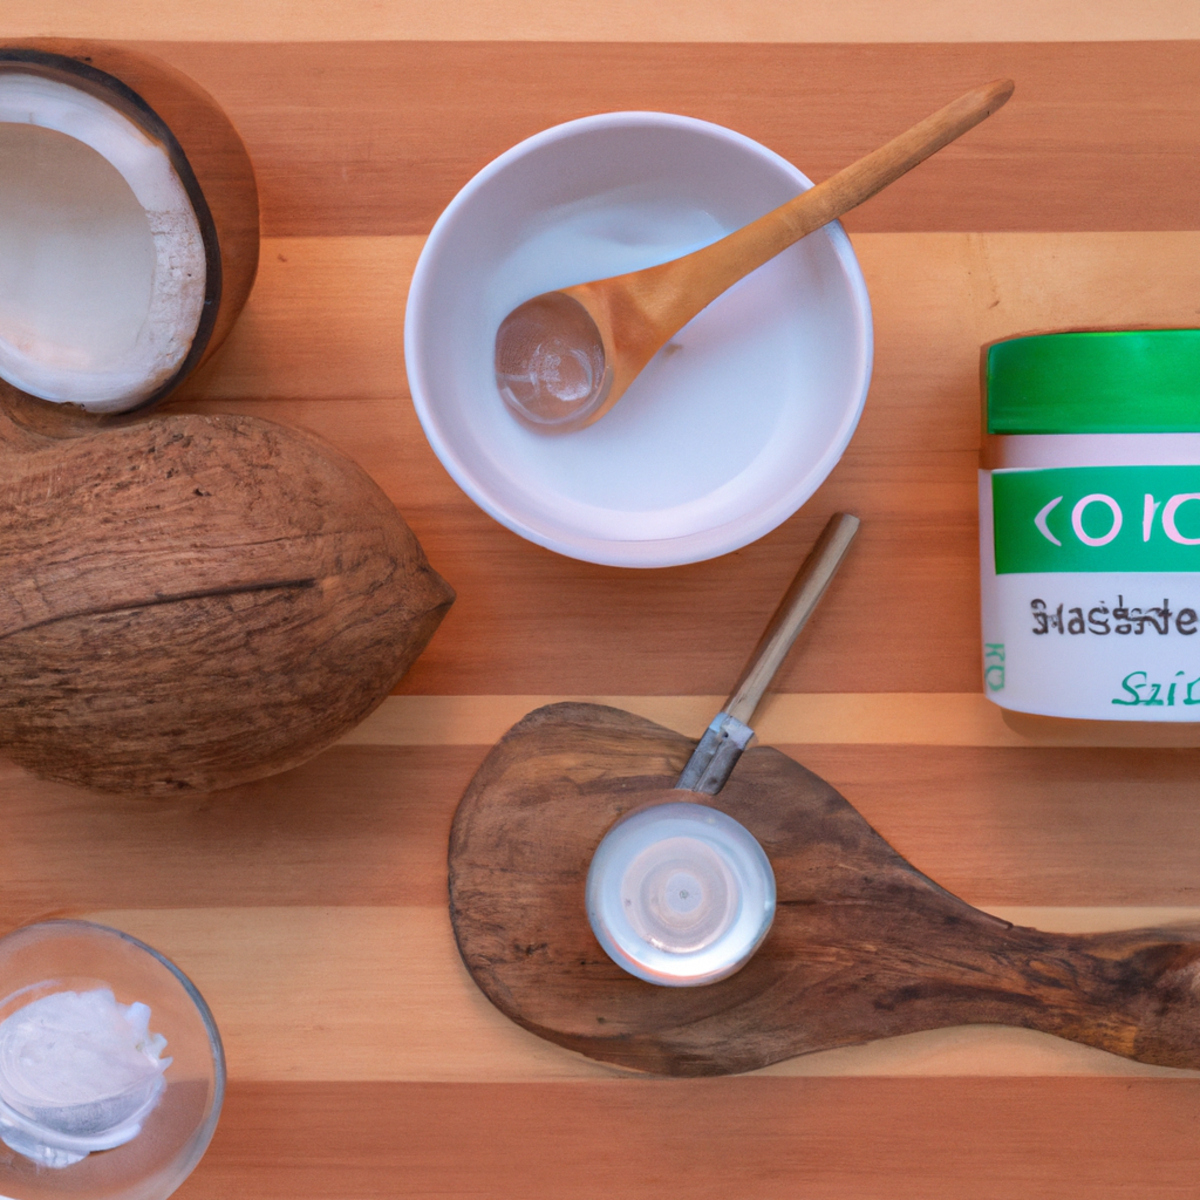 DIY hair care treatments - Organic coconut oil hair mask with tea tree oil and rosemary, mixed with a wooden spoon on a natural wooden table.